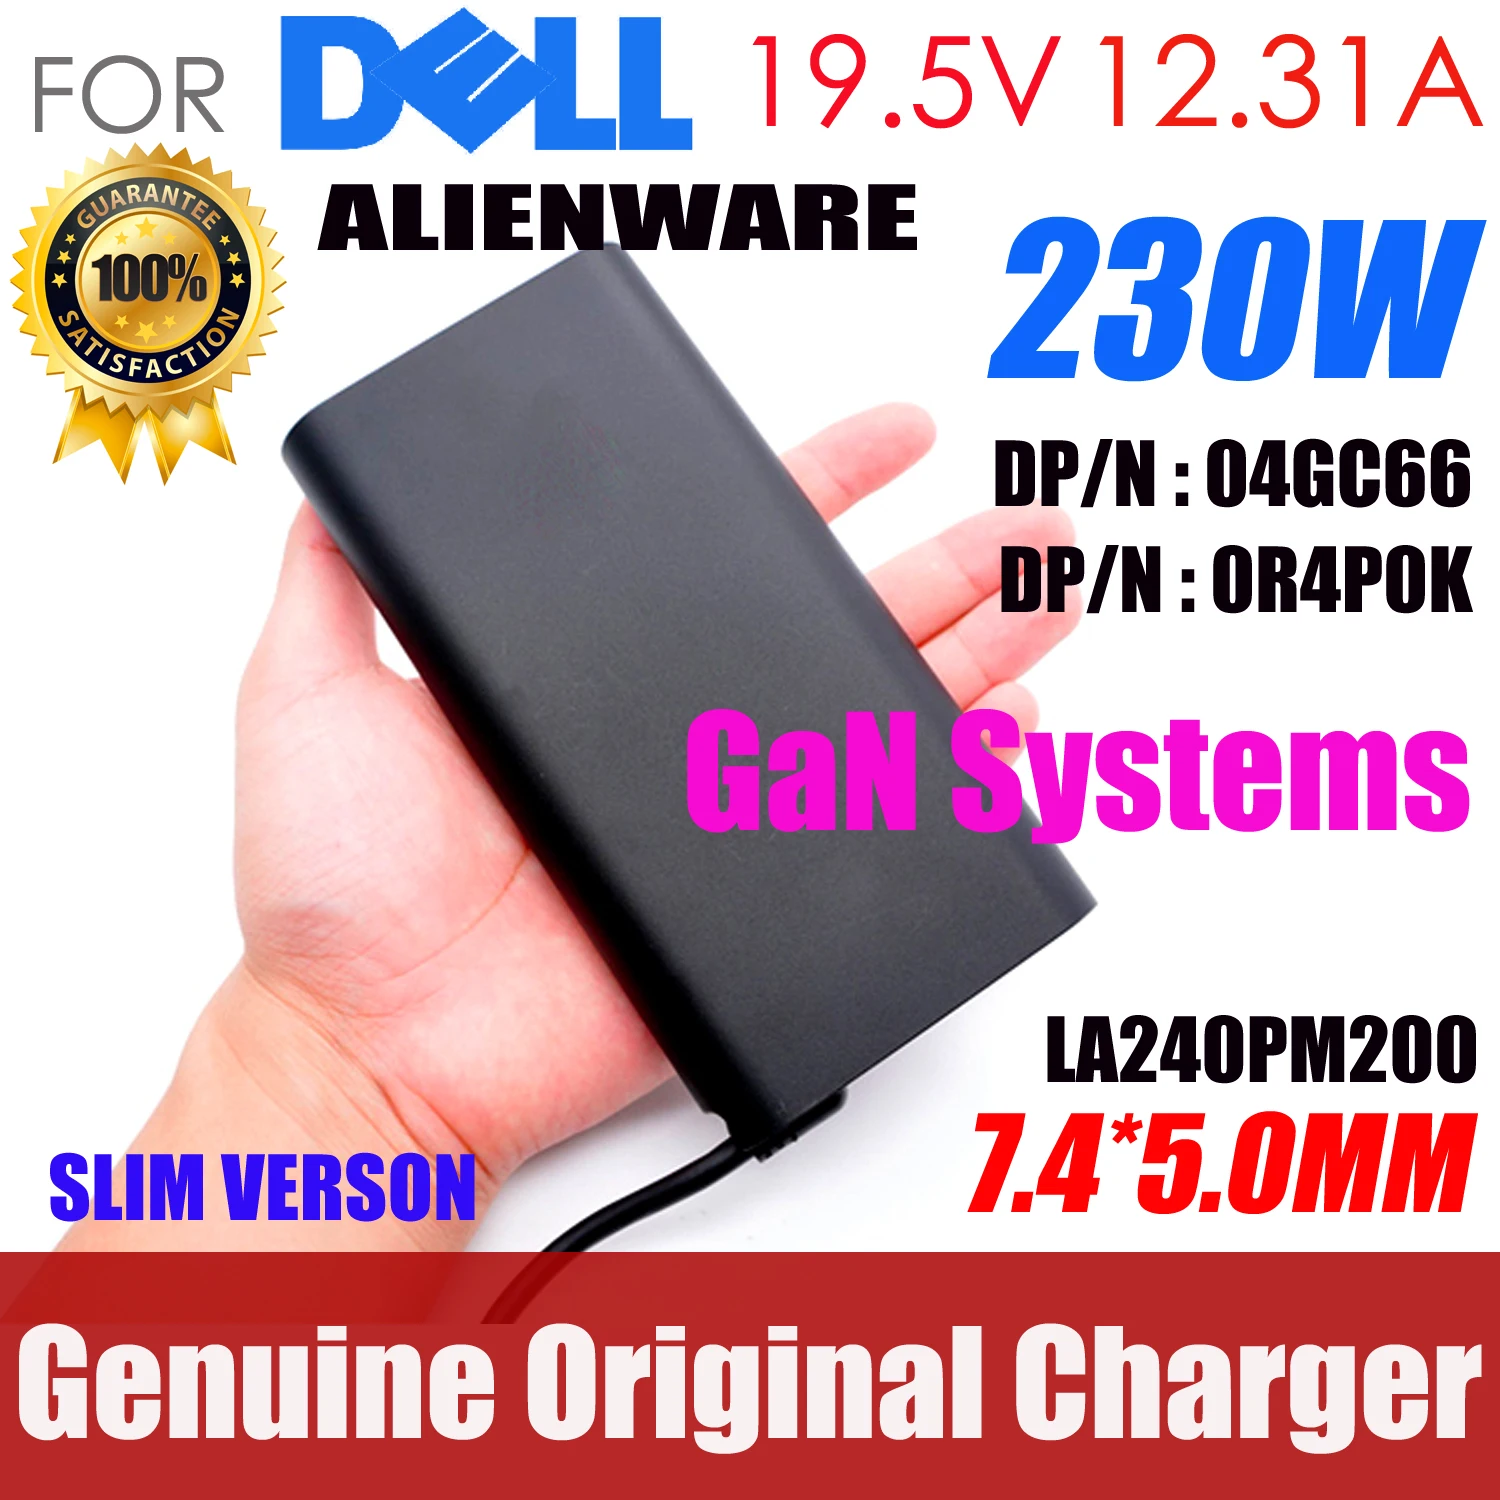 Original 19.5V 12.31A 240W GAN charger Ac Adapter For DELL Alienware M15x M17x R3 X15 X17 51m DA240PM200 DP/N 0R4P0K  04GC66